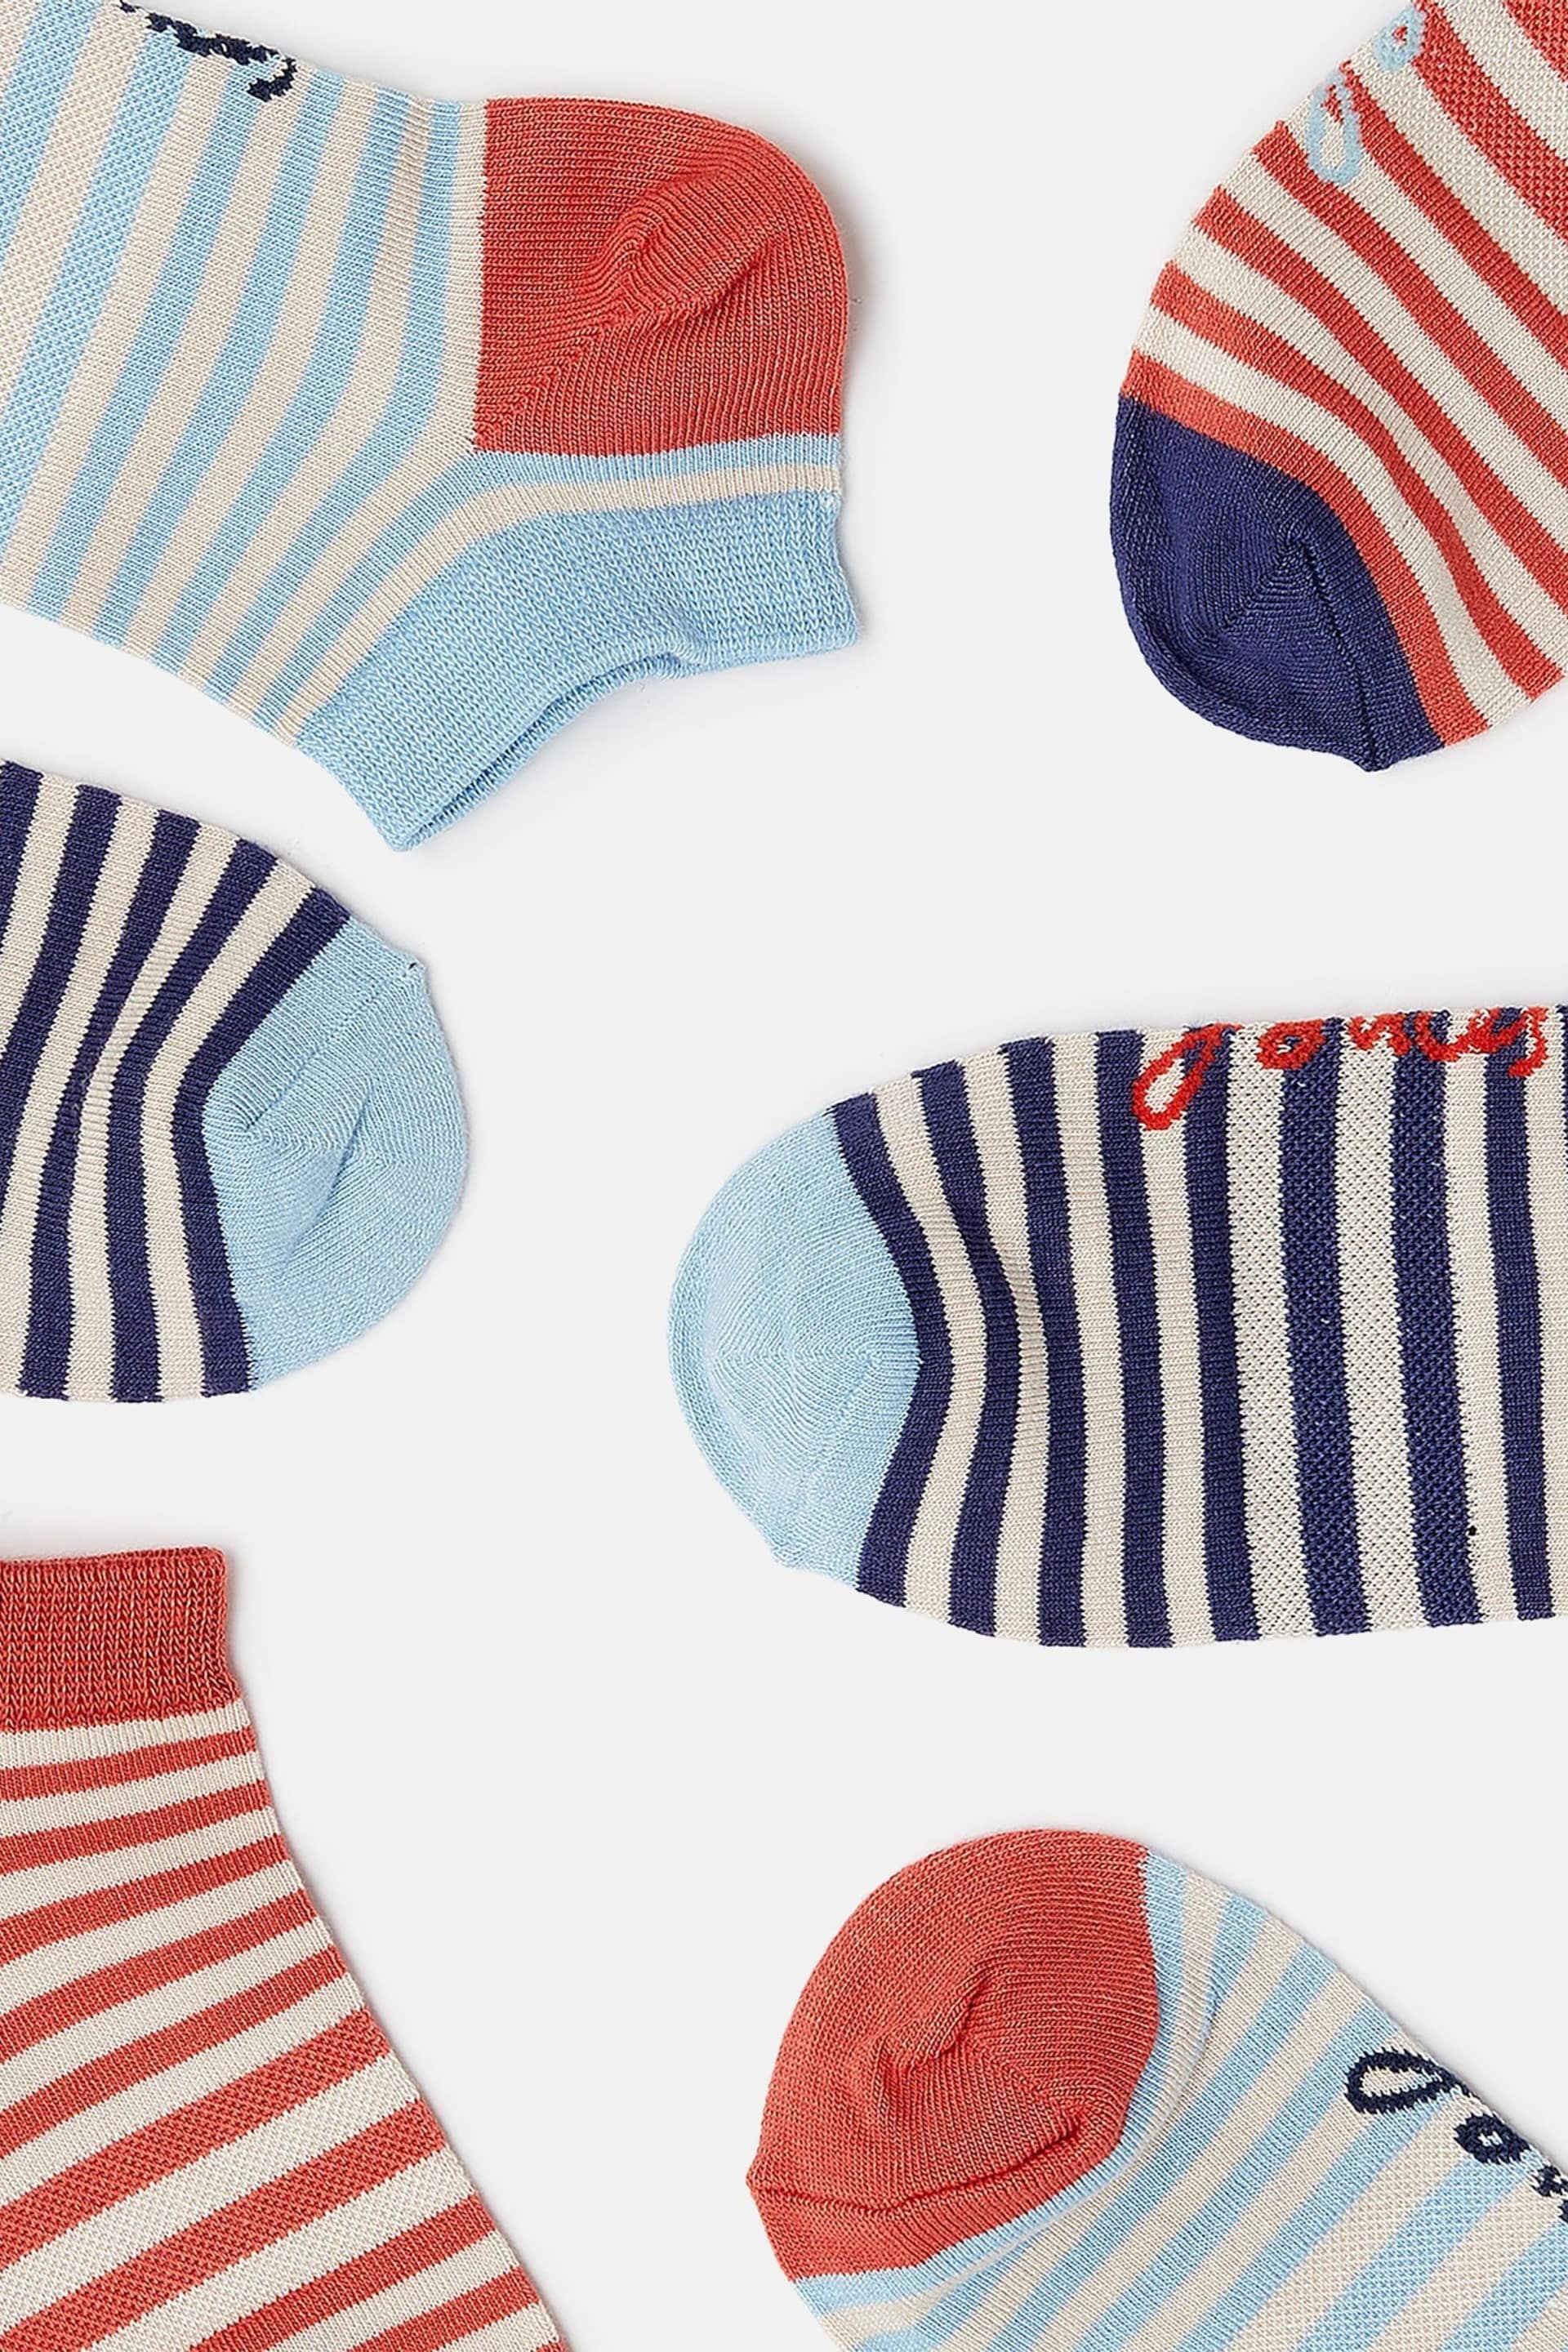 Joules Rilla Blue Striped Trainer Socks (3 Pack) - Image 2 of 3